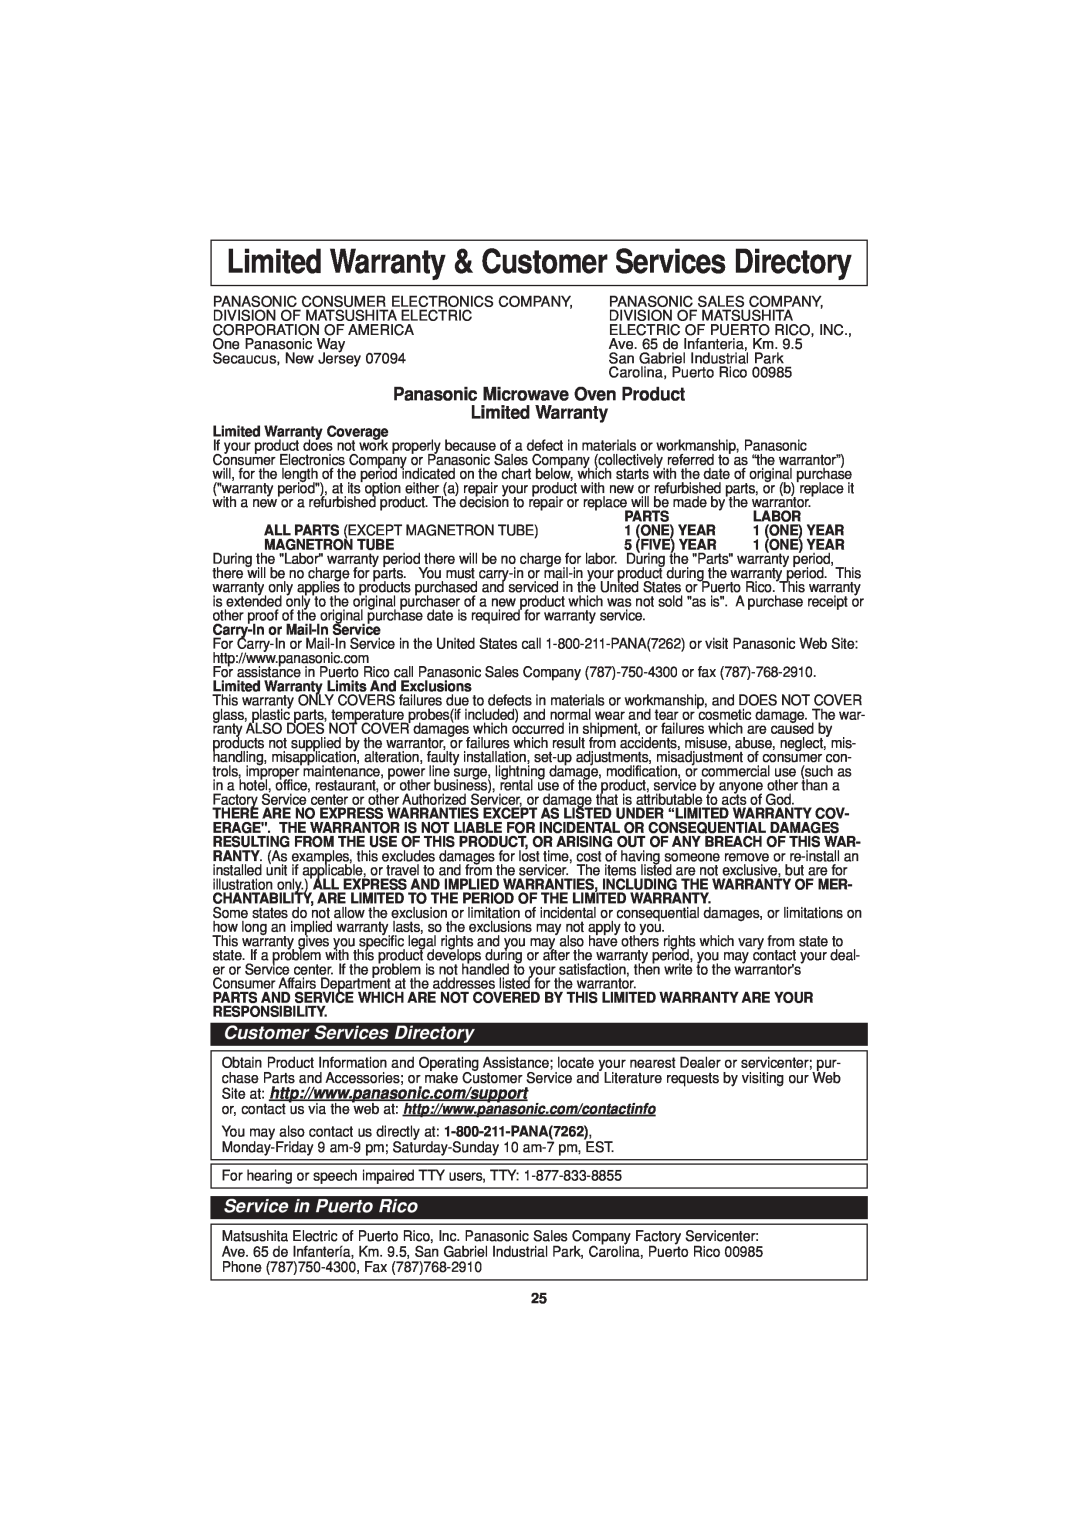 Panasonic NN-H624 operating instructions Limited Warranty & Customer Services Directory, Service in Puerto Rico 